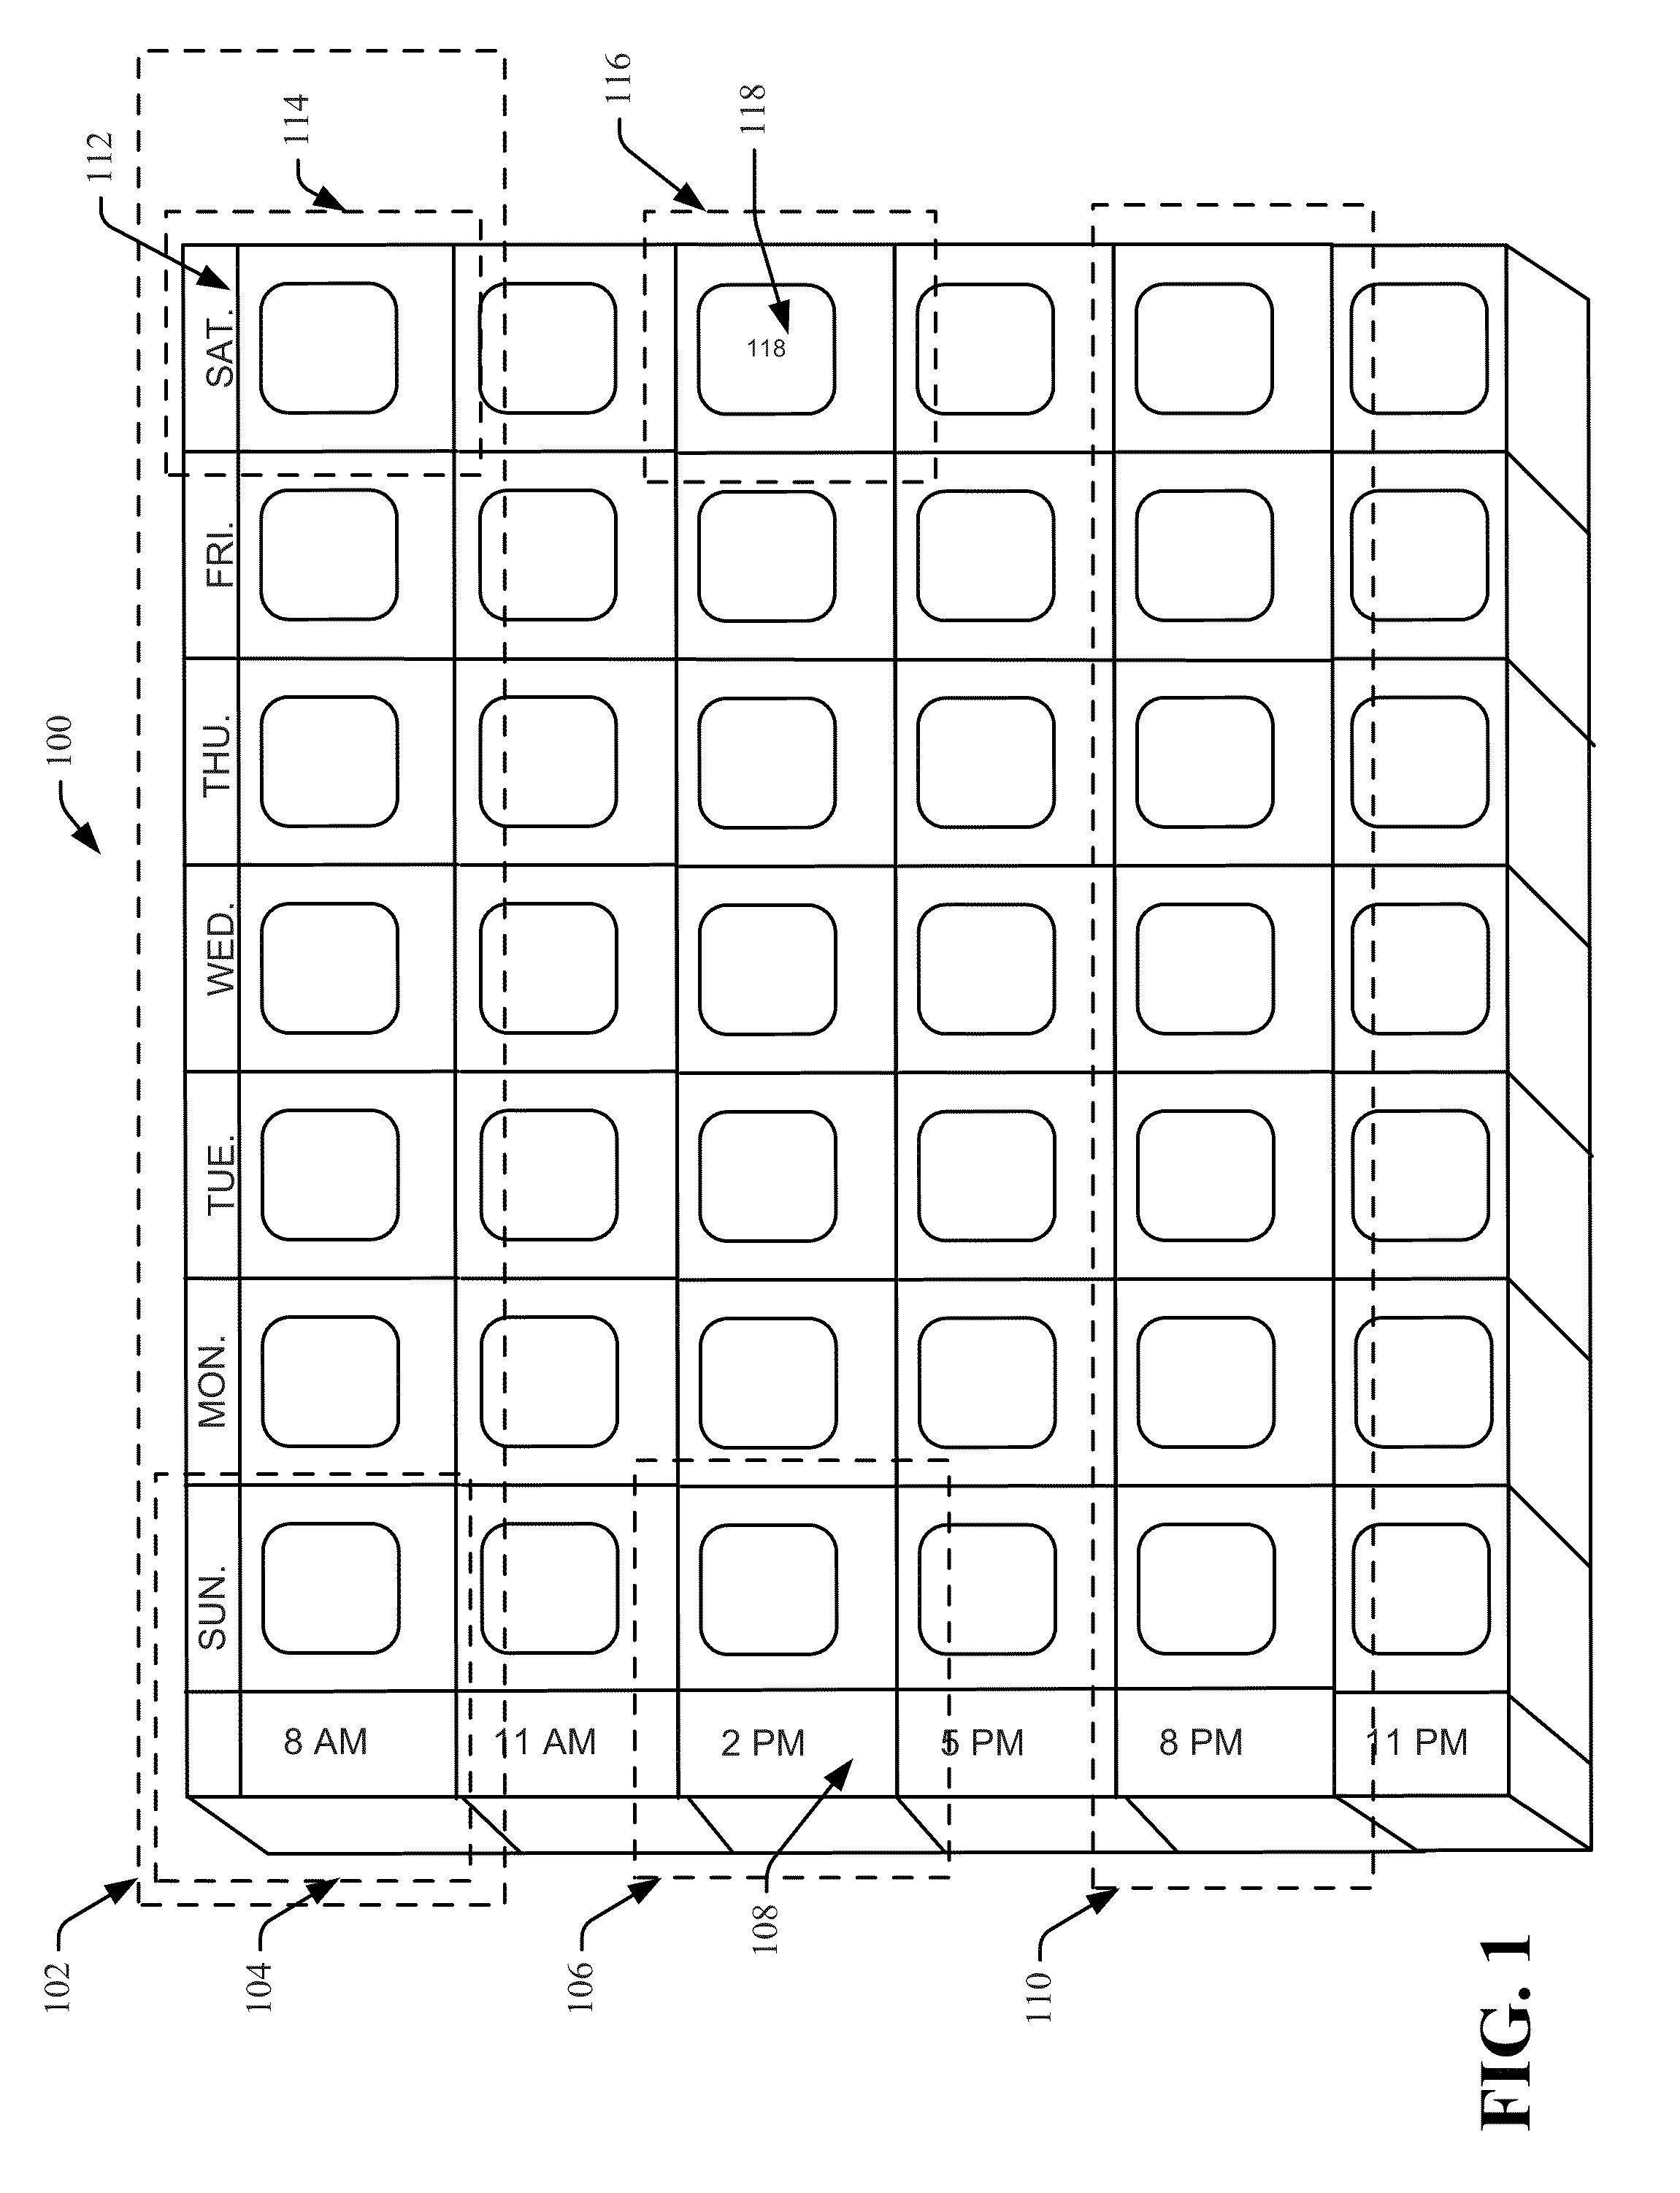 Medication management apparatus and system